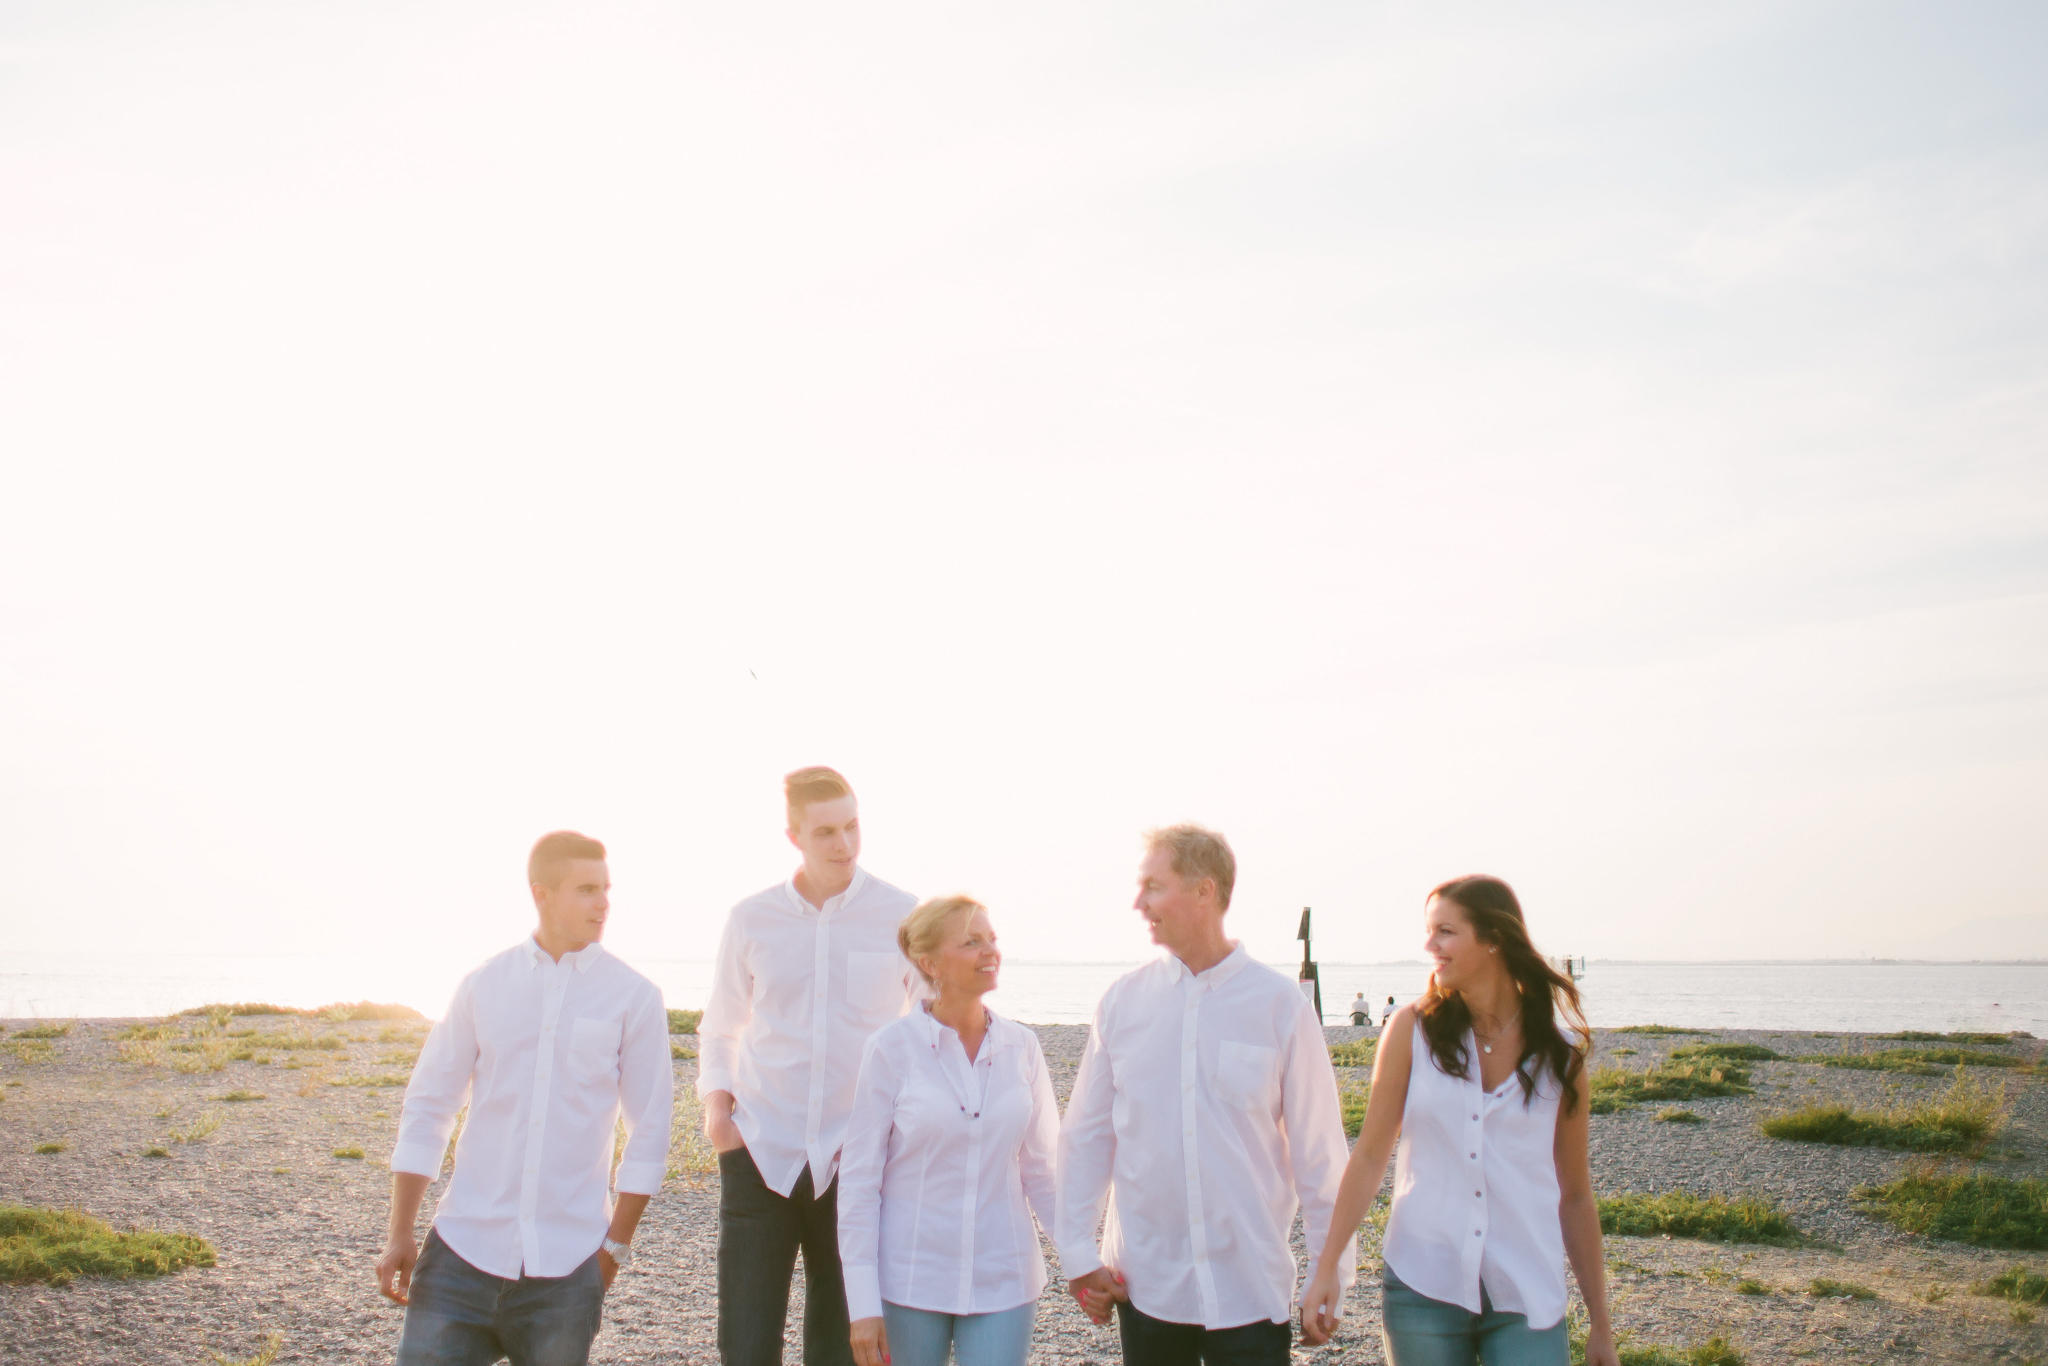 View More: http://michellekarstphotography.pass.us/barkerfamily2015